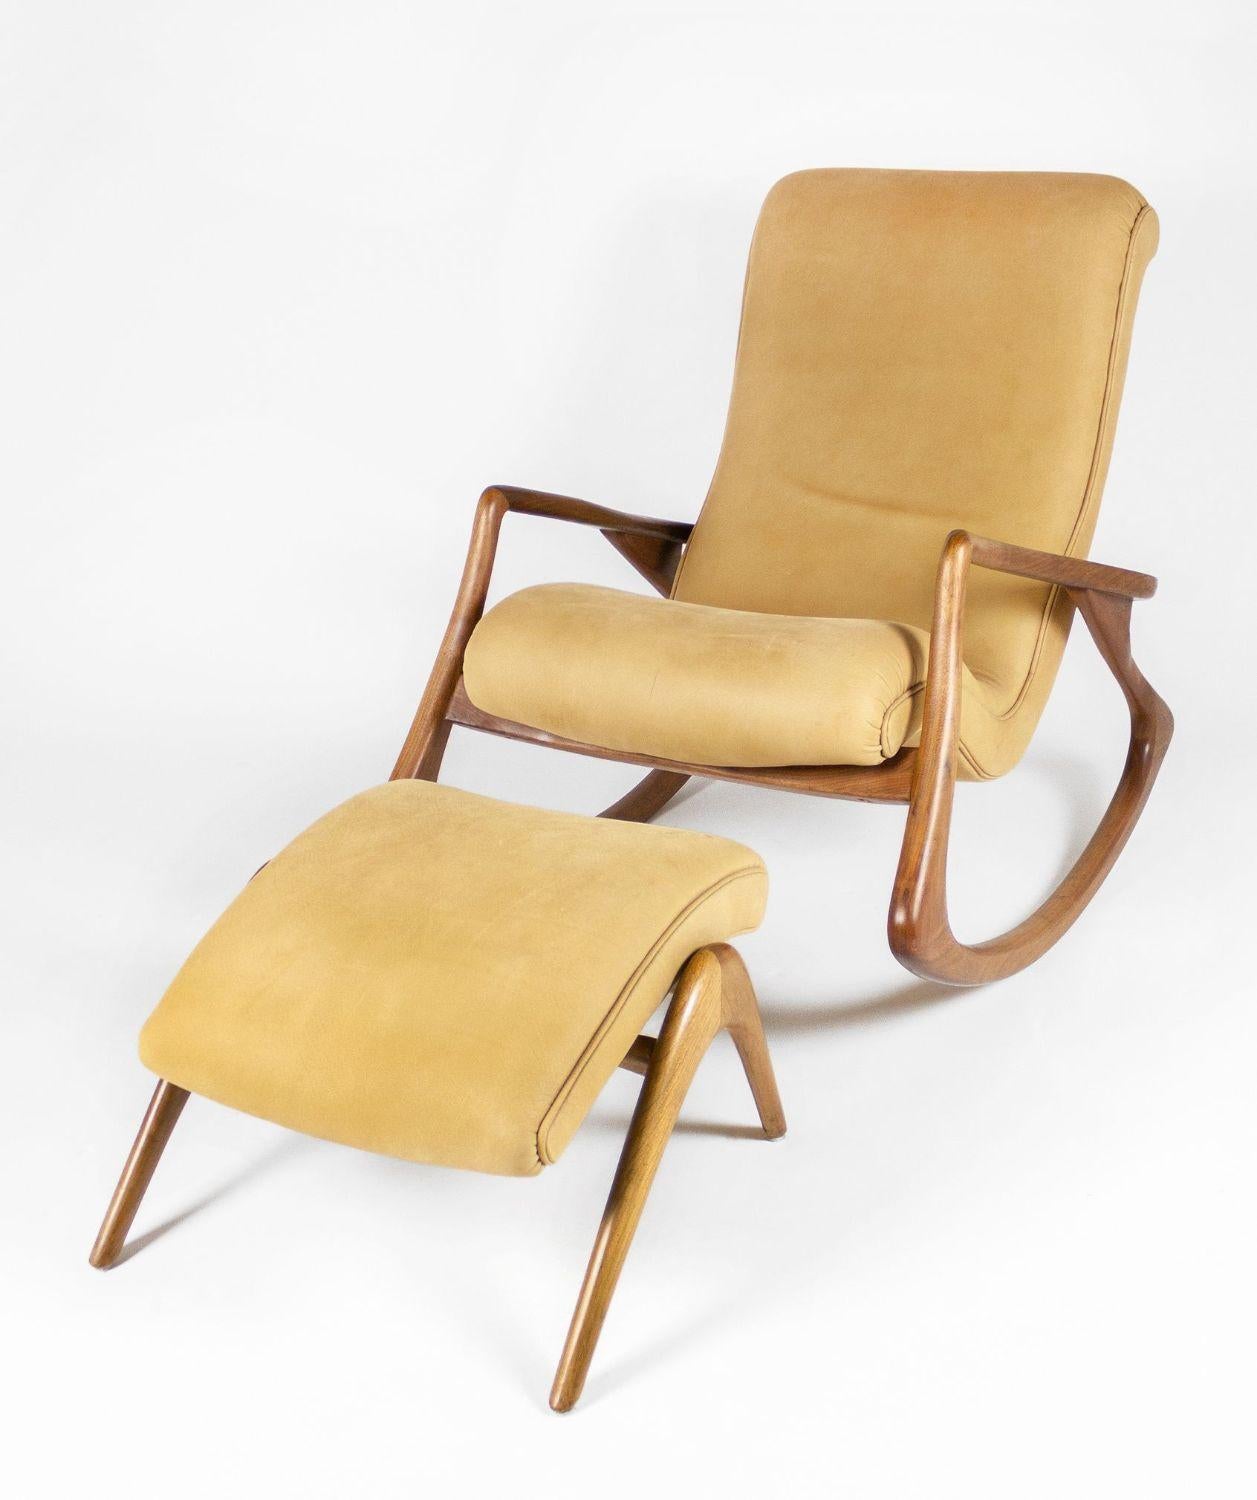 Early Vintage Kagan rocking chair and ottoman in the original soft camel colored leather in very good condition. Very comfortable.